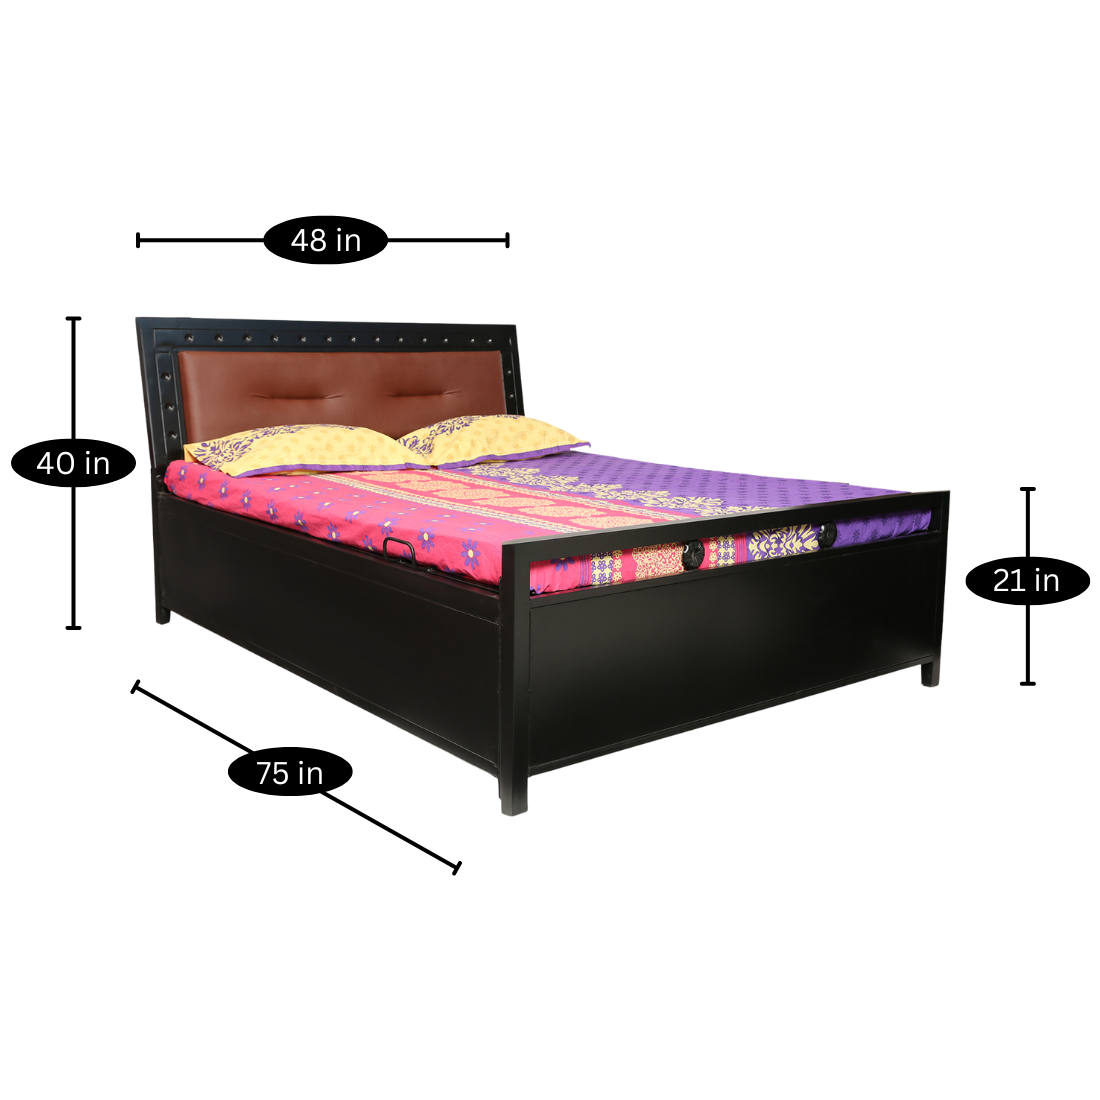 Daisy Hydraulic Storage Double Metal Bed with Brown Cushion Headrest (Color - Black)